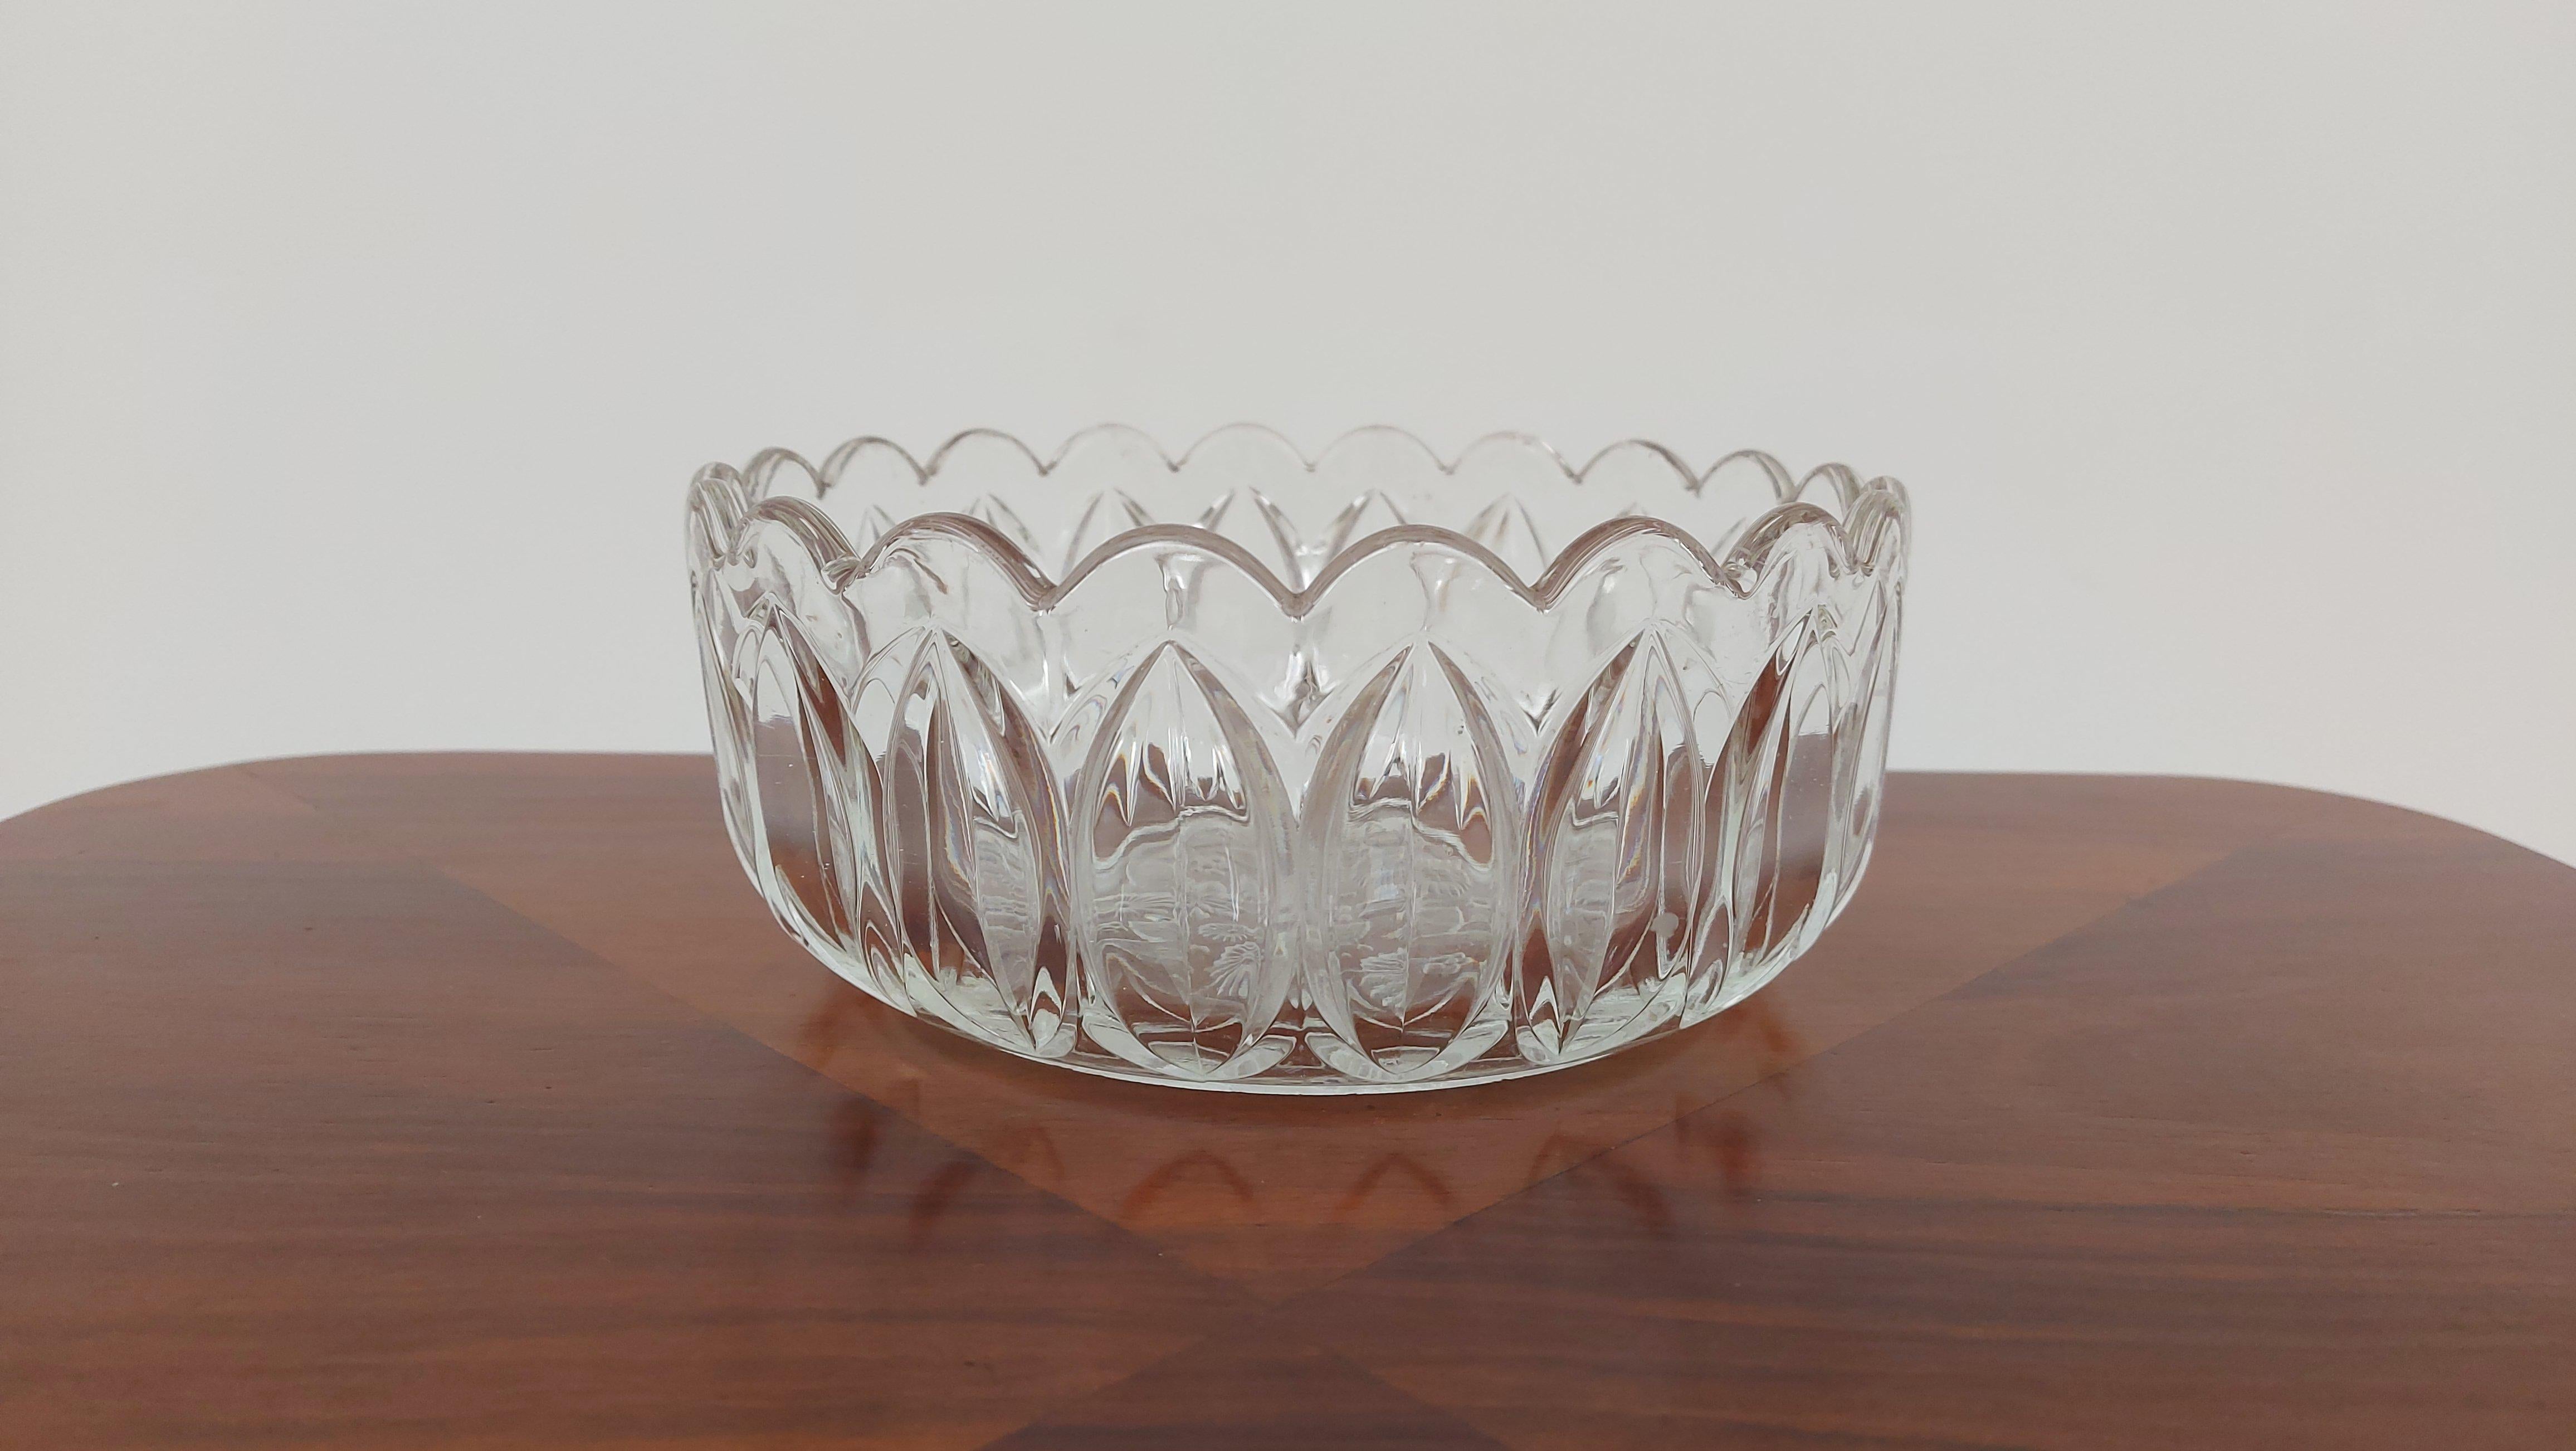 Crystal bowl for fruit or sweets.

Made in Poland in the 1950s / 1960s.

Very good condition.

Dimensions: height 9 cm / diameter 20.5 cm.